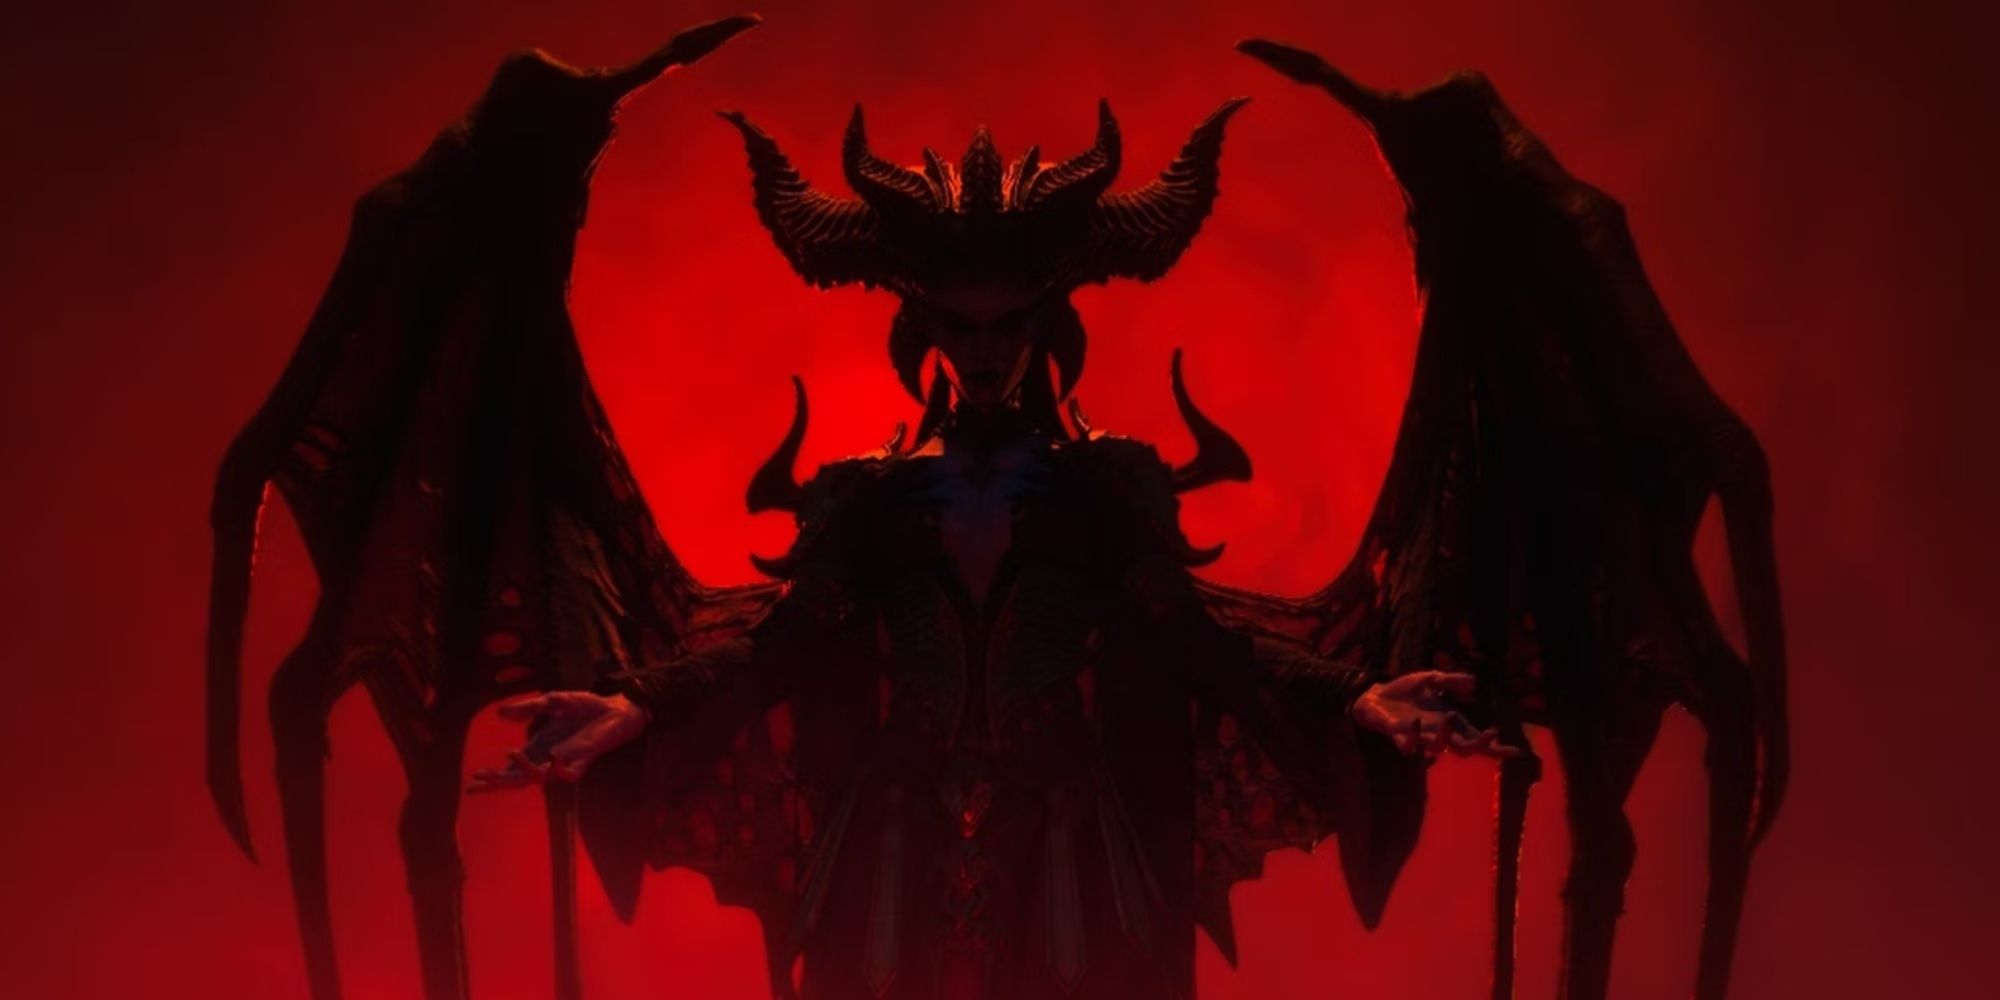  Lilith from Diablo 4, silhouetted against a blood red background.